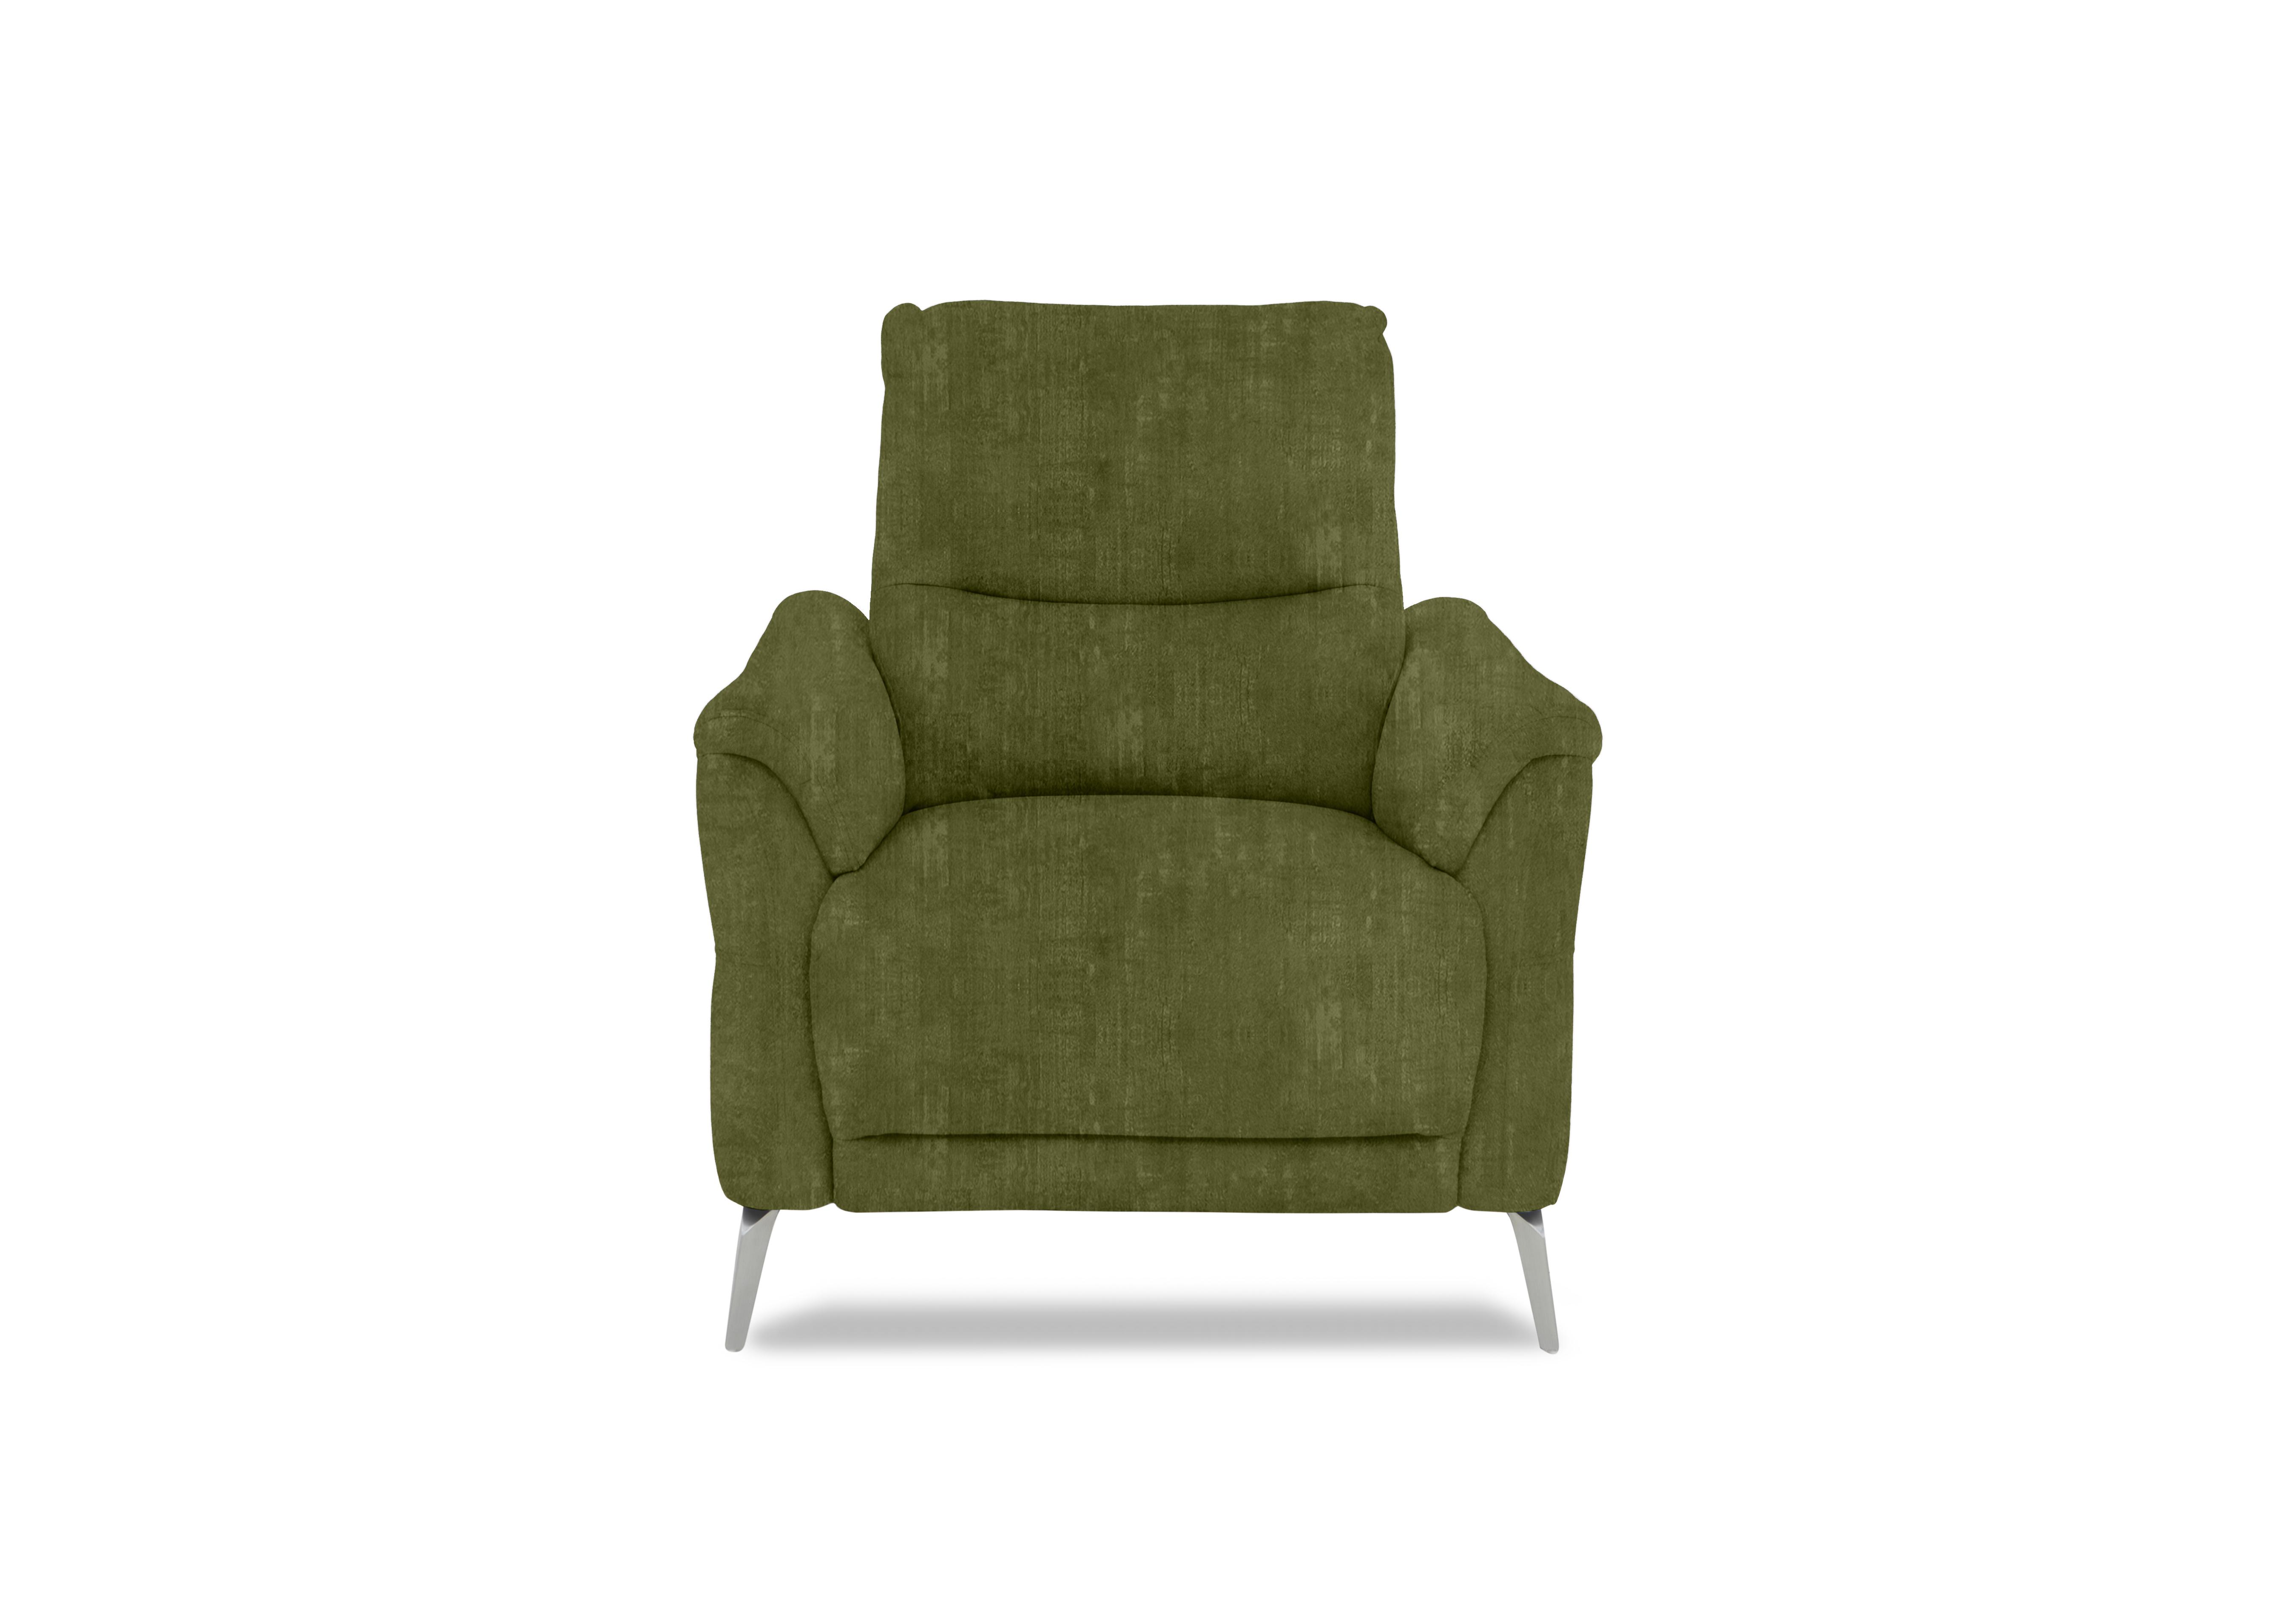 Daytona Fabric Chair in 52003 Heritage Olive on Furniture Village